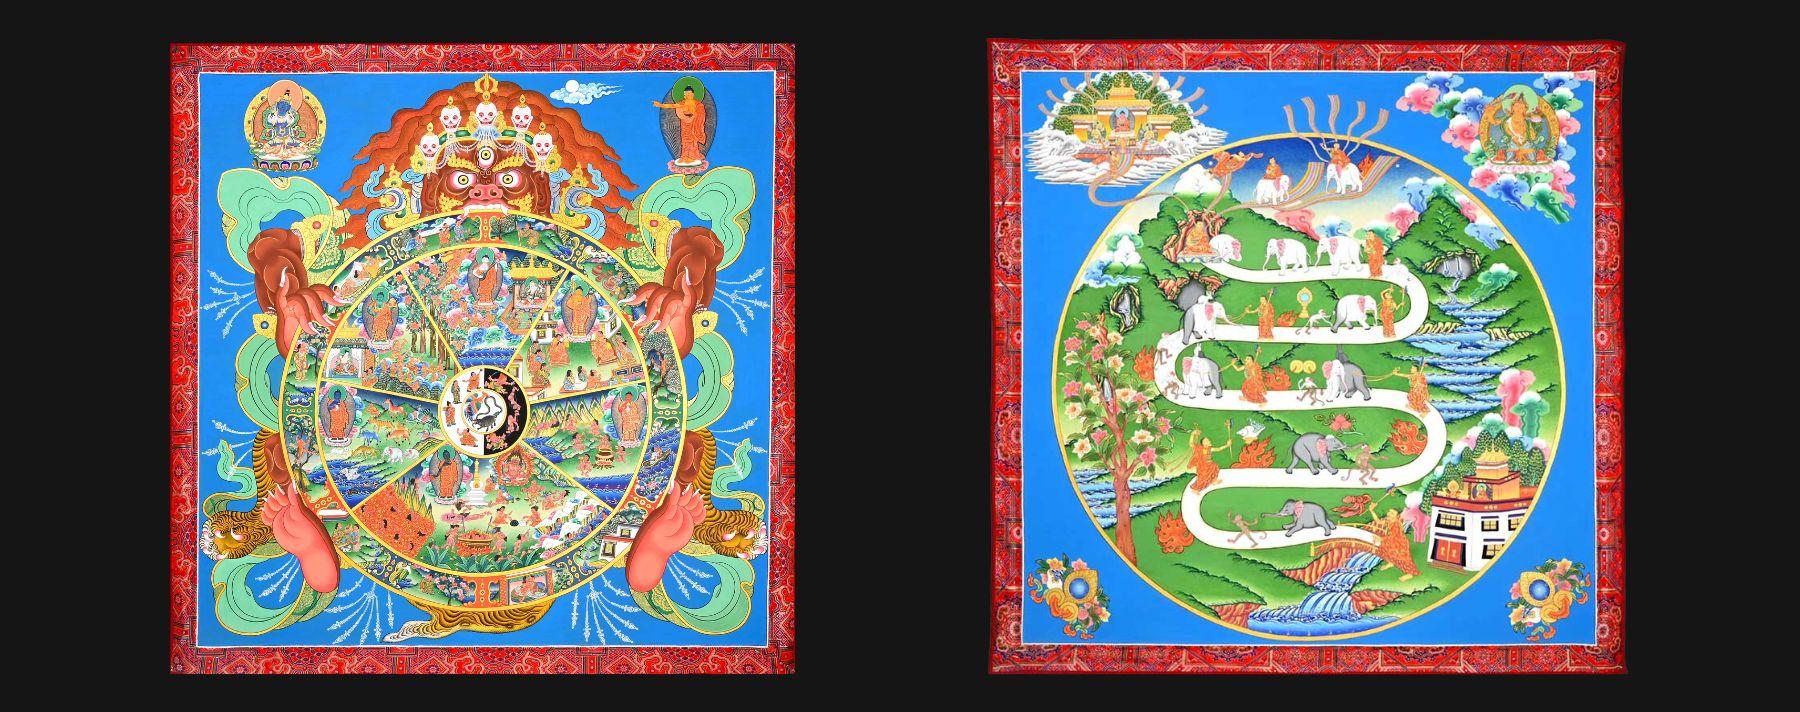 Image of two commission Thangka paintings: bhavacakra or “wheel of becoming,” and śamatha or “calm-abiding,"  on a black background 